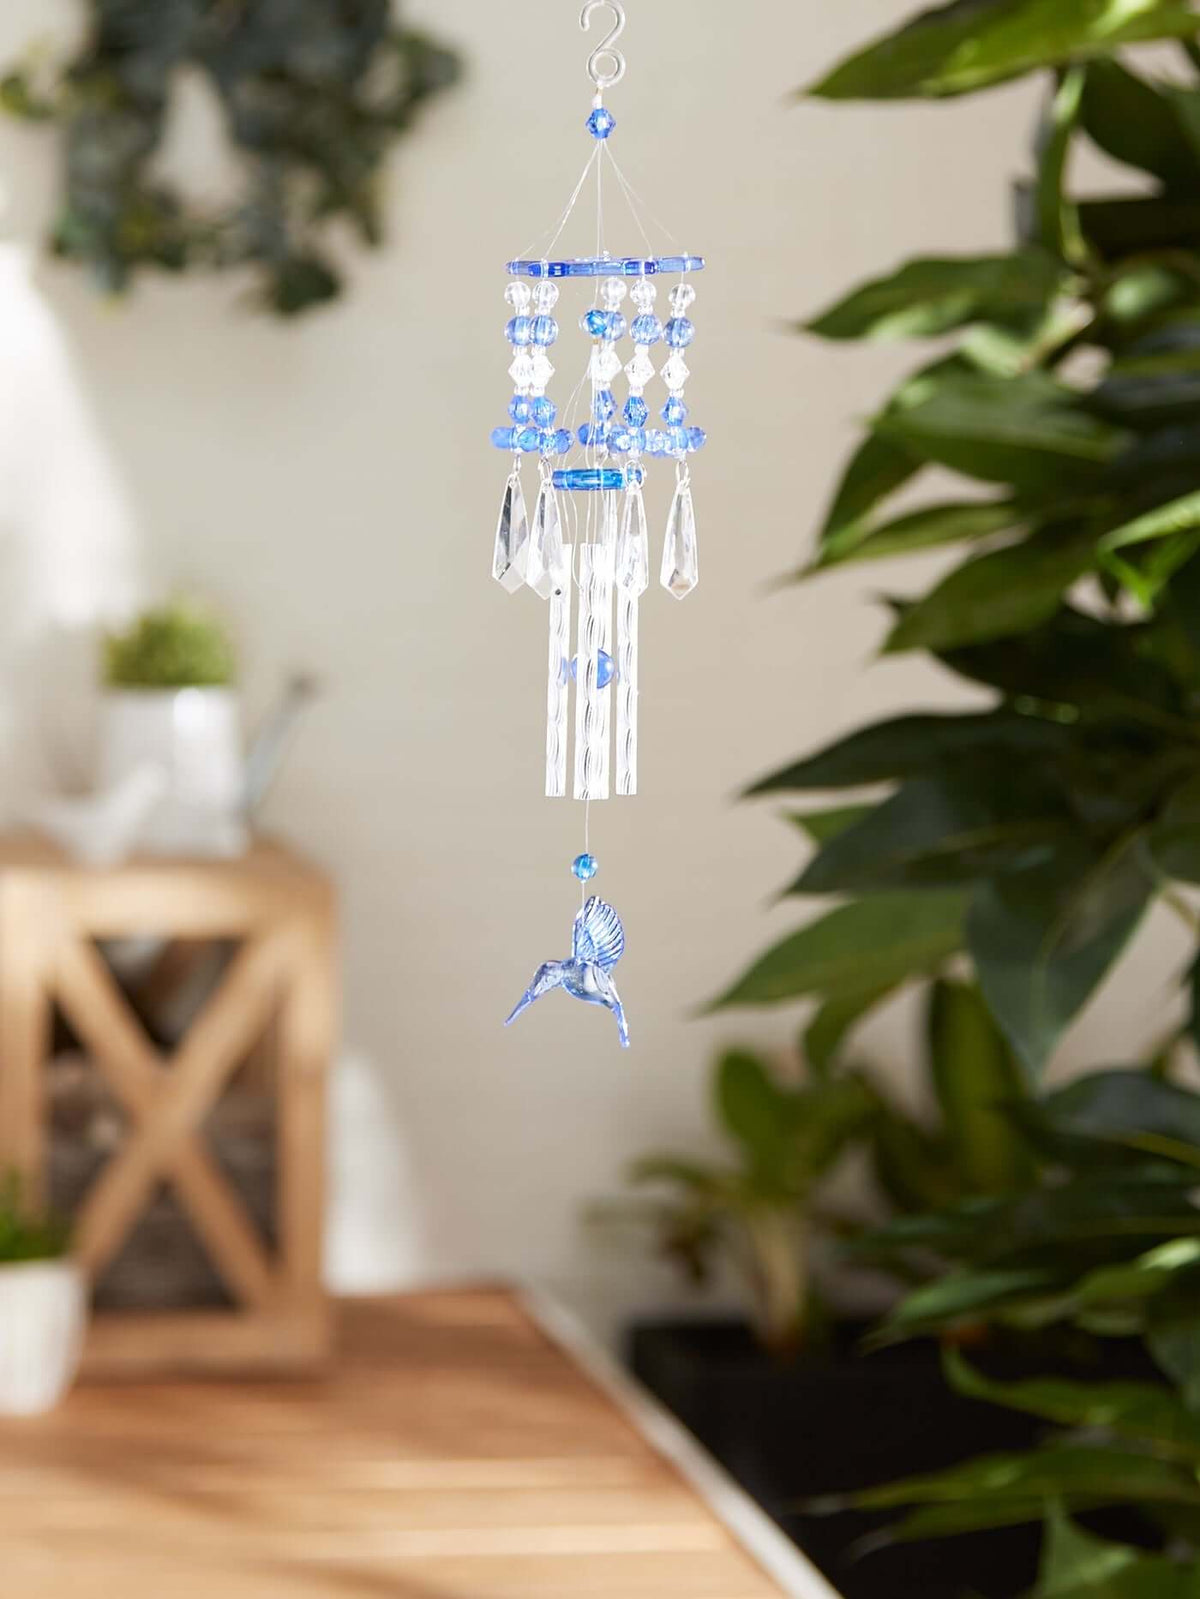 Blue Hummingbird Wind Chimes - The House of Awareness